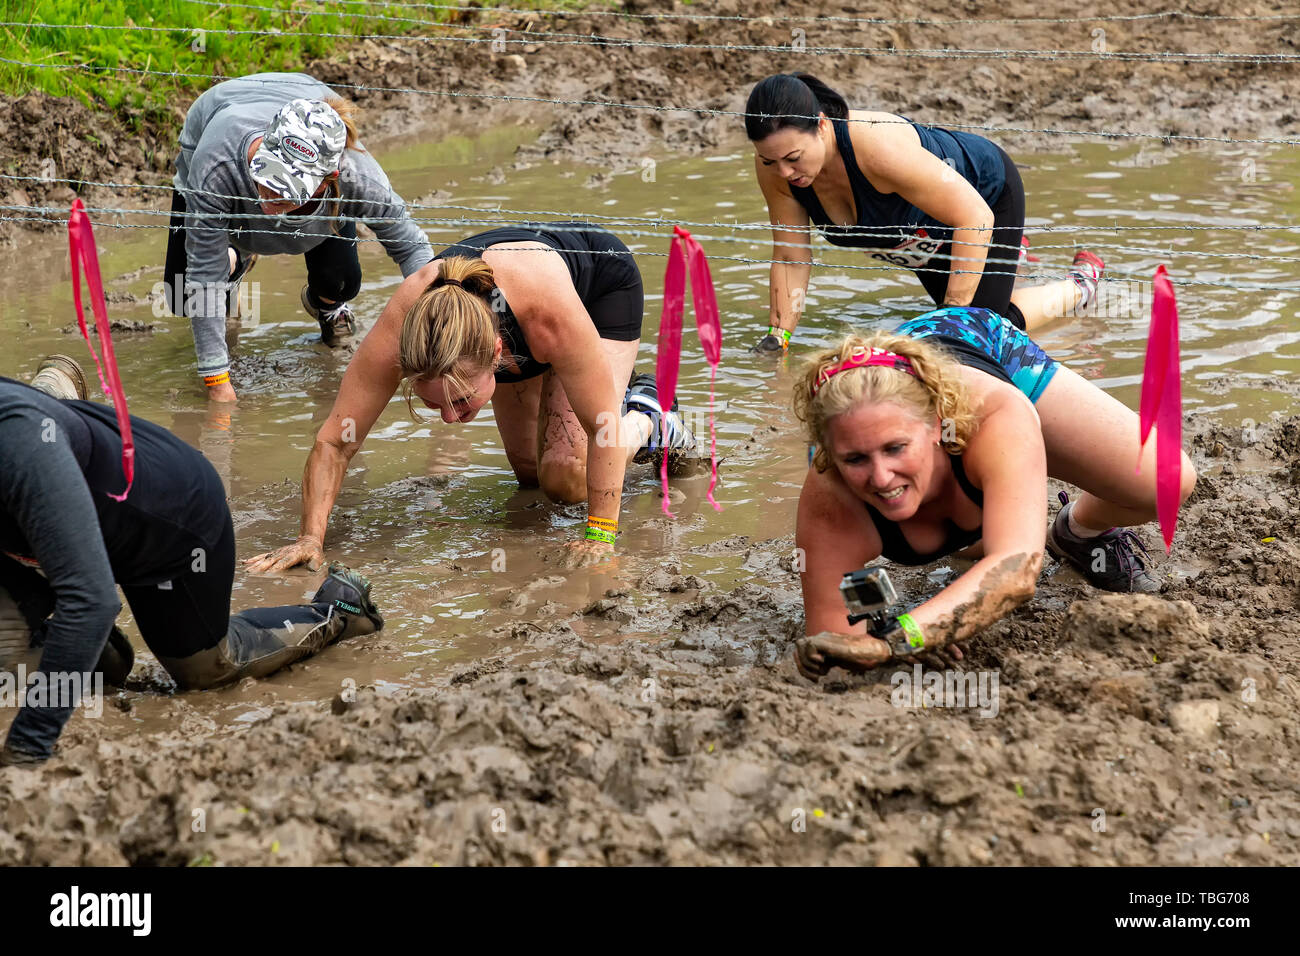 Rugged Maniac Obstacle Race Kitchener Ontario Canada June 01 2019 Stock Photo